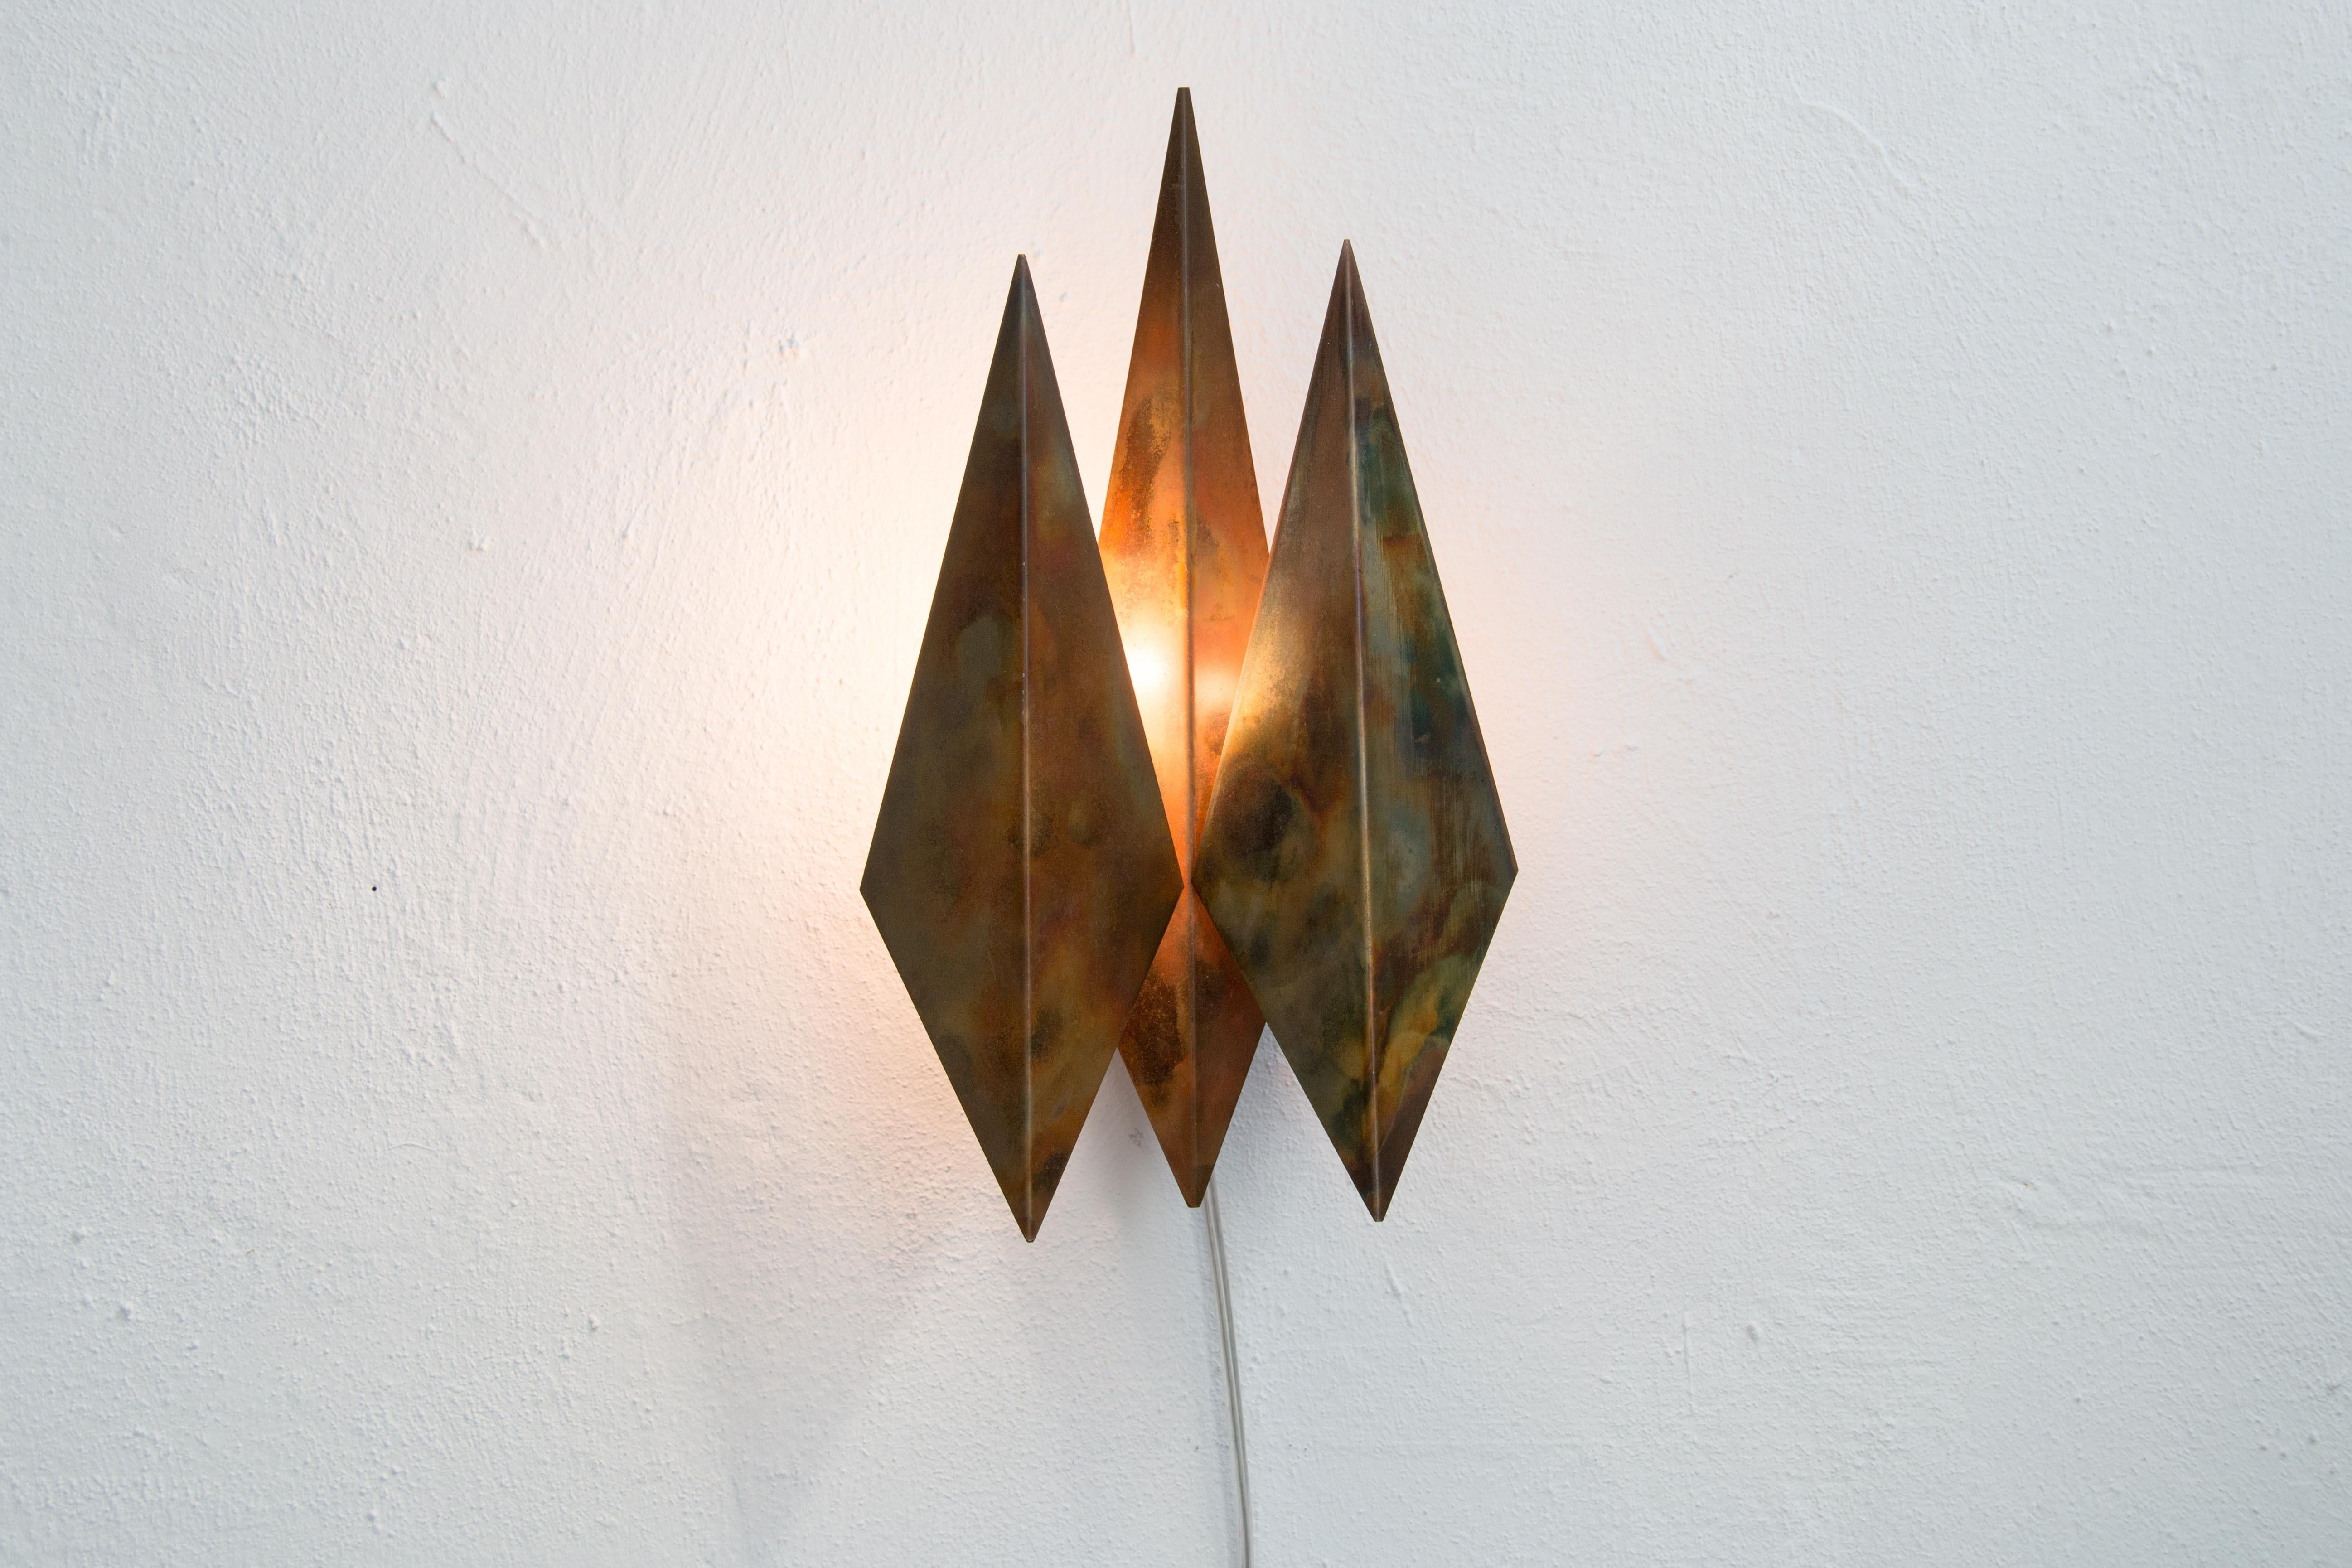 Rare Vintage 1960s wall lamp by Svend Aage Holm Sørensen
Composed of three patinated copper shades
Manufactured and marked by Holm Sørensen.